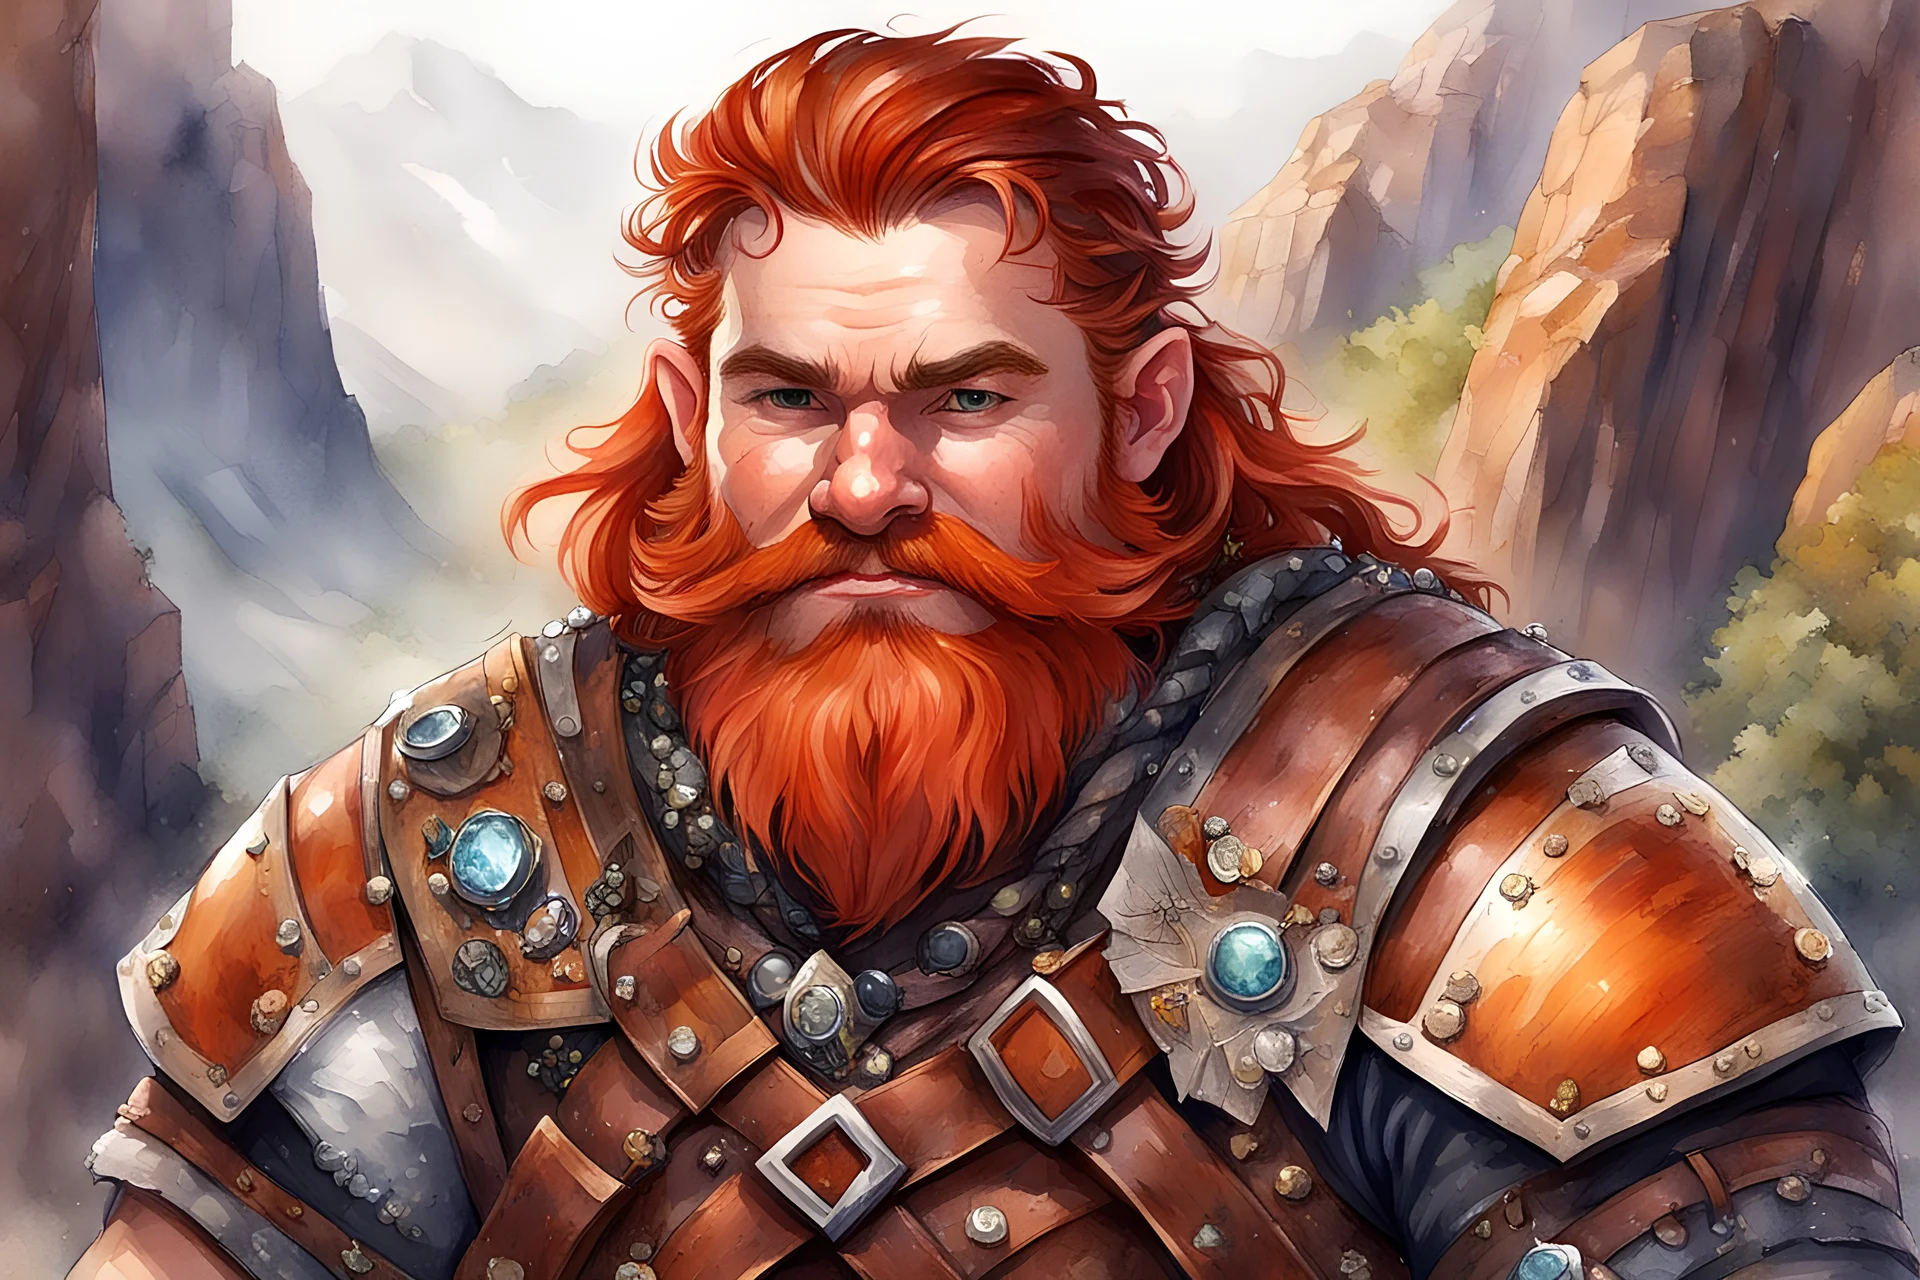 Create a watercolor fantasy portrait of a young dwarf prospector with a broad build, muscular frame. Braided red beard adorned with small trinkets and gems. He wears practical leather armor, reinforced with metal plates, and carries a warhammer slung over his shoulder. Slight smile. Background: rocky canyon.